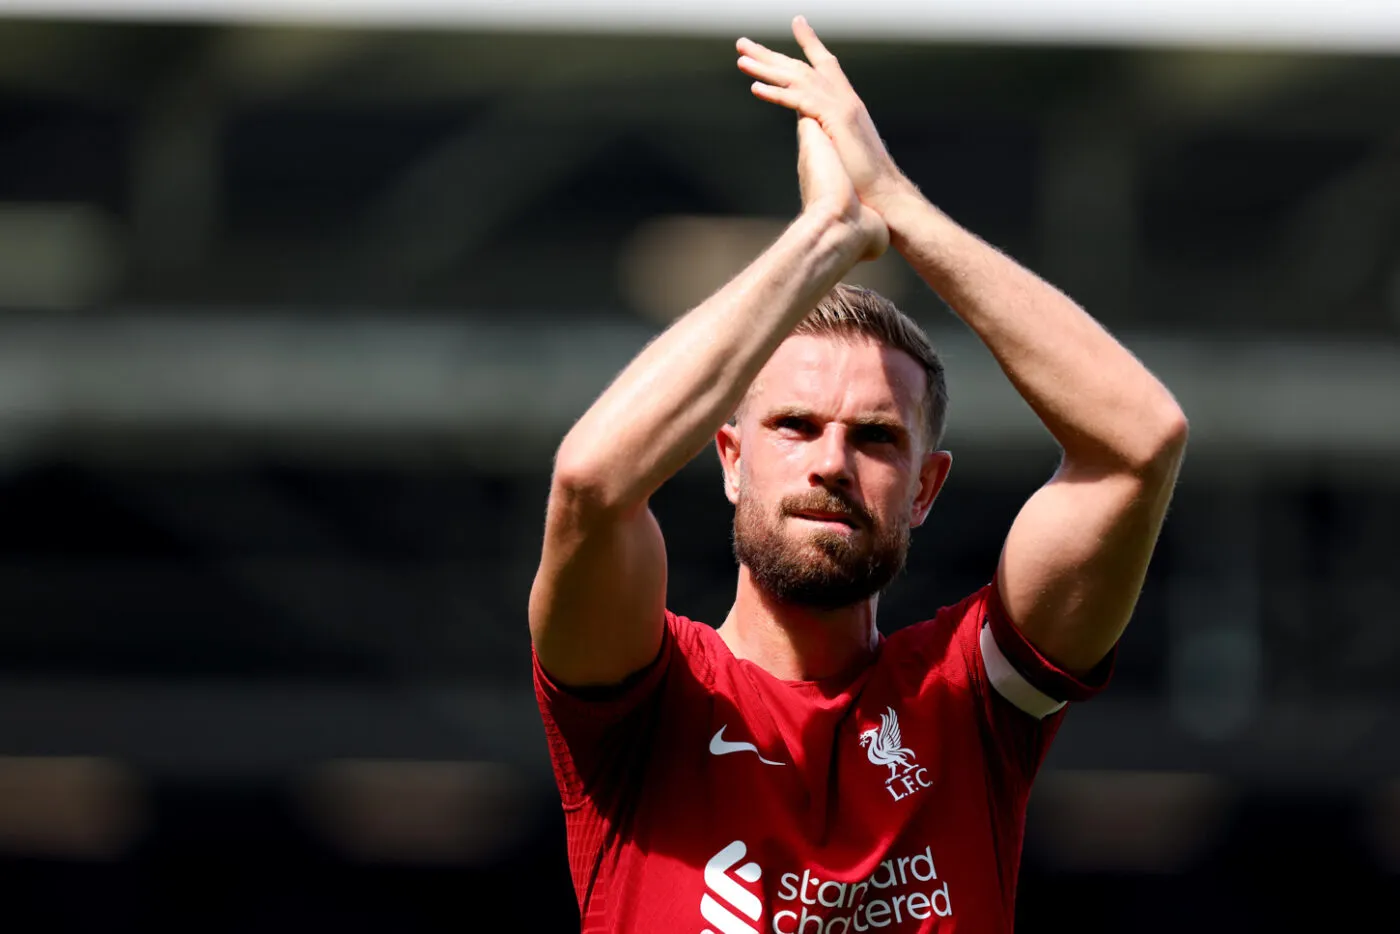 6th August 2022; Craven Cottage, Fulham, London, England; Premier League football, Fulham versus Liverpool: Jordan Henderson of Liverpool applauds fans after the 2-2 draw - Photo by Icon sport